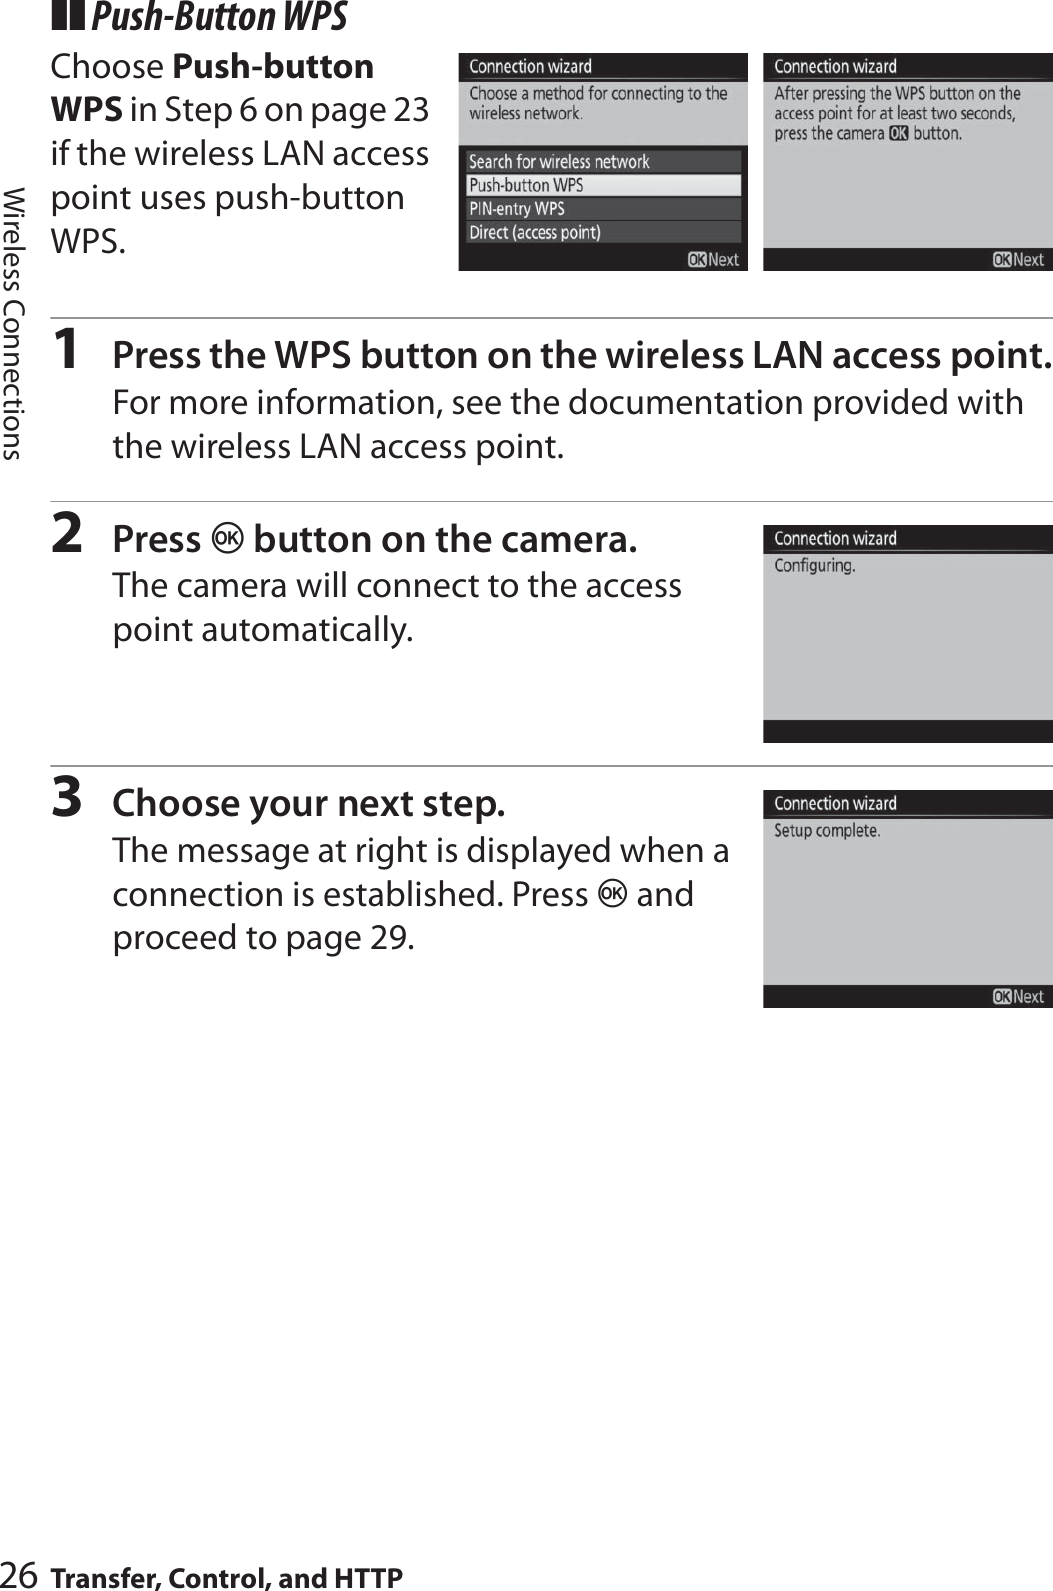 26 Transfer, Control, and HTTPWireless Connections❚❚ Push-Button WPSChoose Push-button WPS in Step 6 on page 23 if the wireless LAN access point uses push-button WPS.1Press the WPS button on the wireless LAN access point.For more information, see the documentation provided with the wireless LAN access point.2Press J button on the camera.The camera will connect to the access point automatically.3Choose your next step.The message at right is displayed when a connection is established. Press J and proceed to page 29.